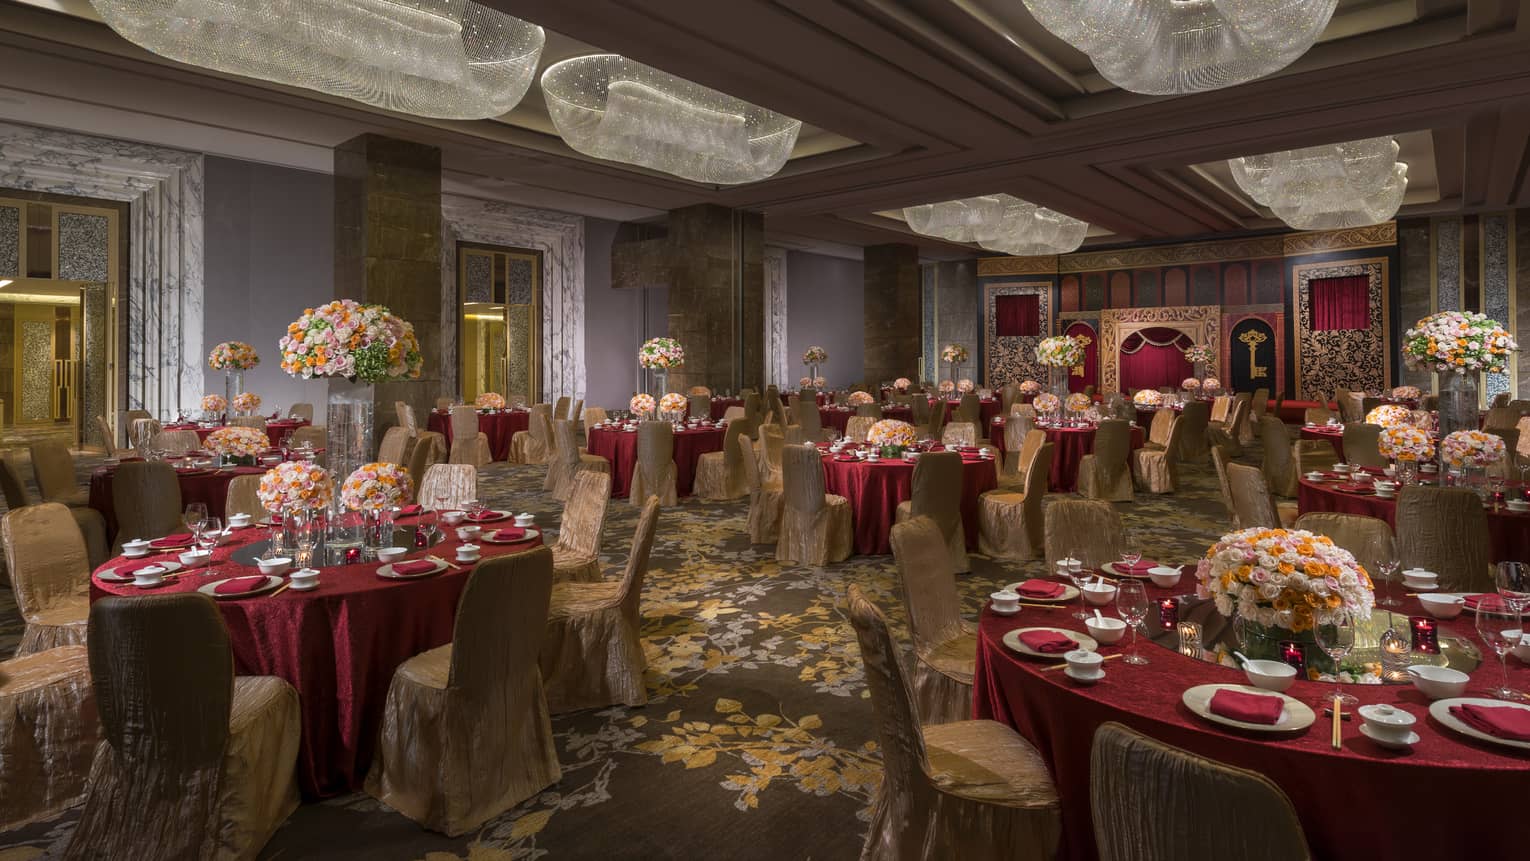 Four Seasons Ballroom with red banquet dining tables with pink flowers, long crystal chandeliers 